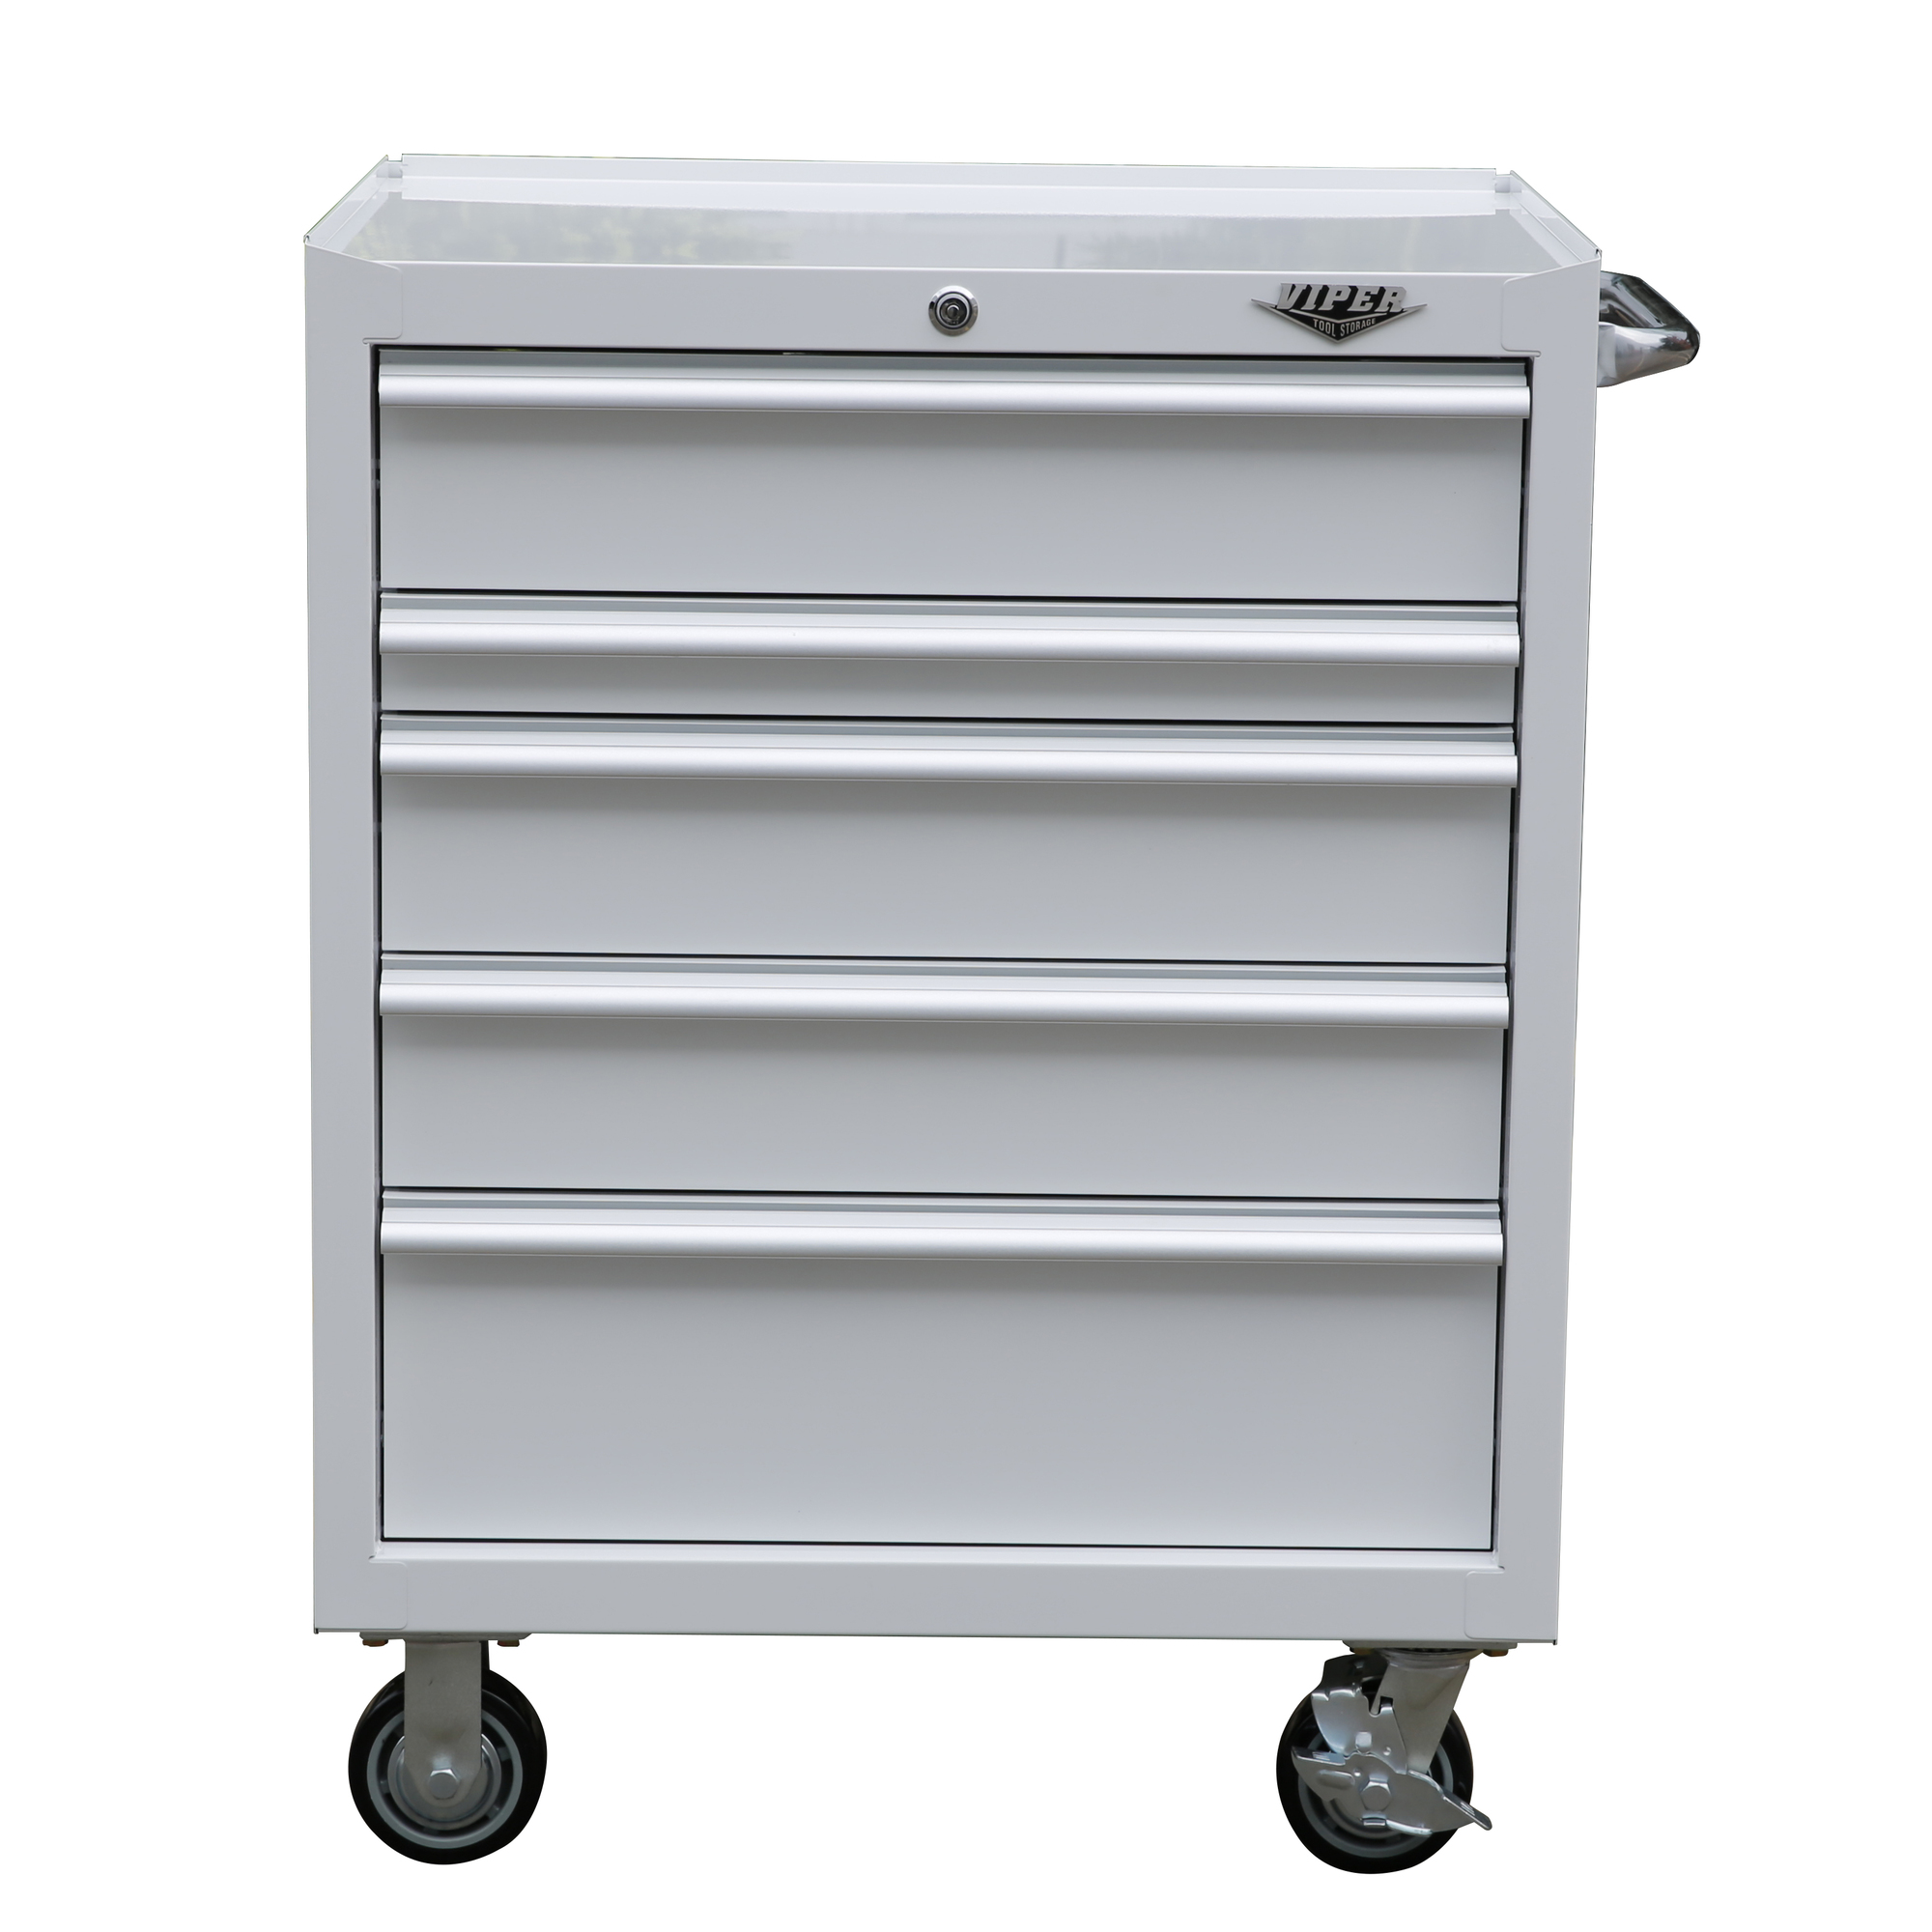 Viper Tool Storage, 5-Drawer 18G Steel Rolling Cabinet, White, Width 30 in, Height 41 in, Color White, Model V300541WHR